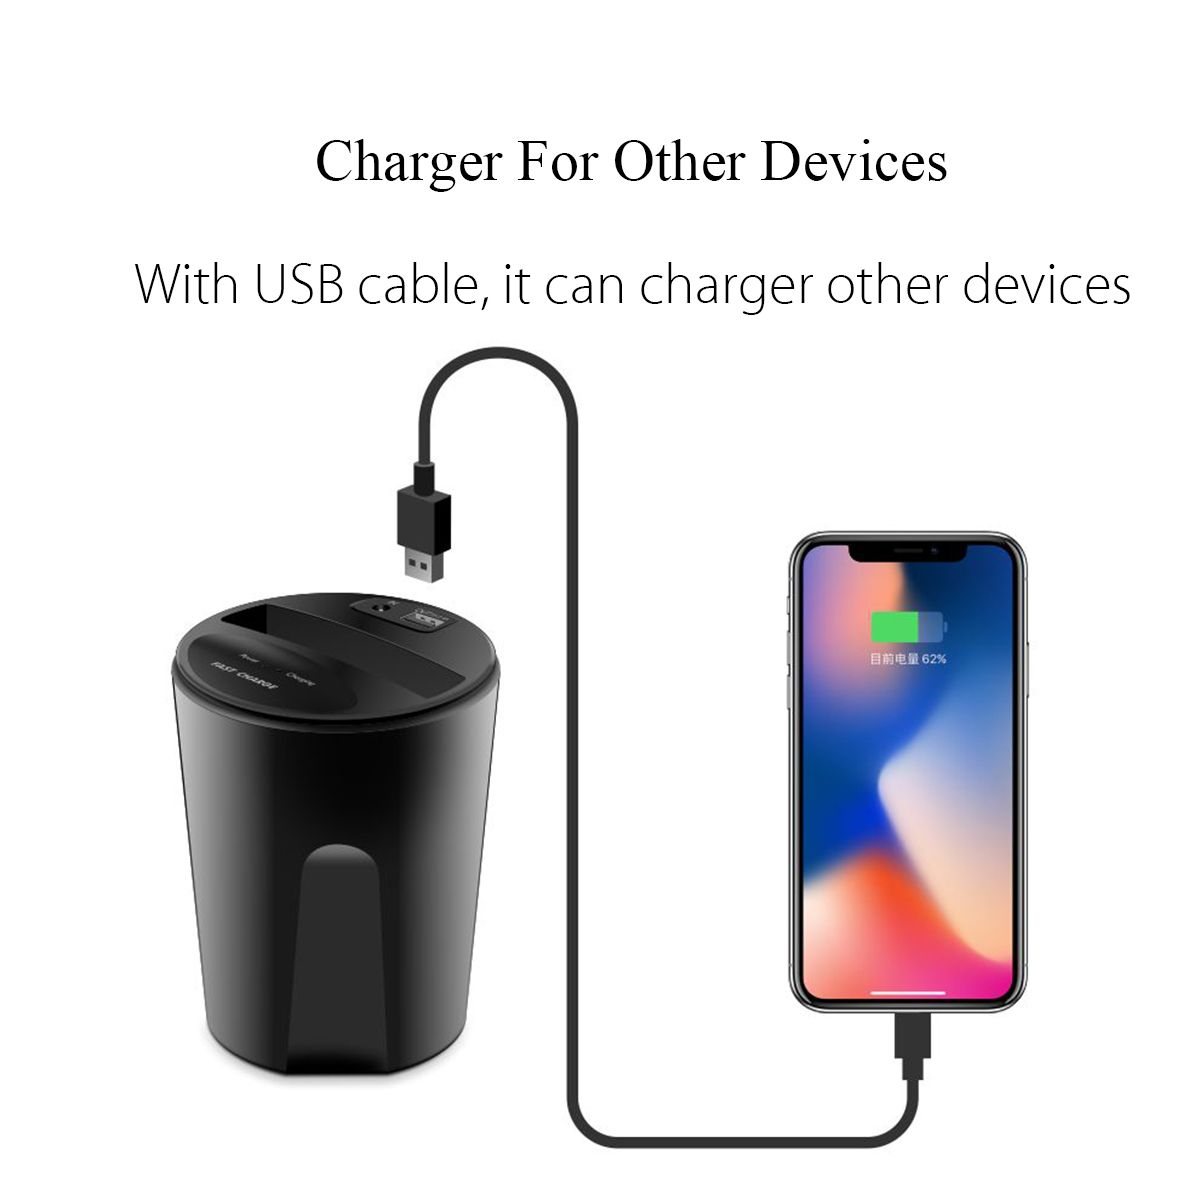 10W-Fast-Qi-Wireless-Charger-Car-Cup-Holder-USB-Output-for-iPhone-X-8-S8-1260881